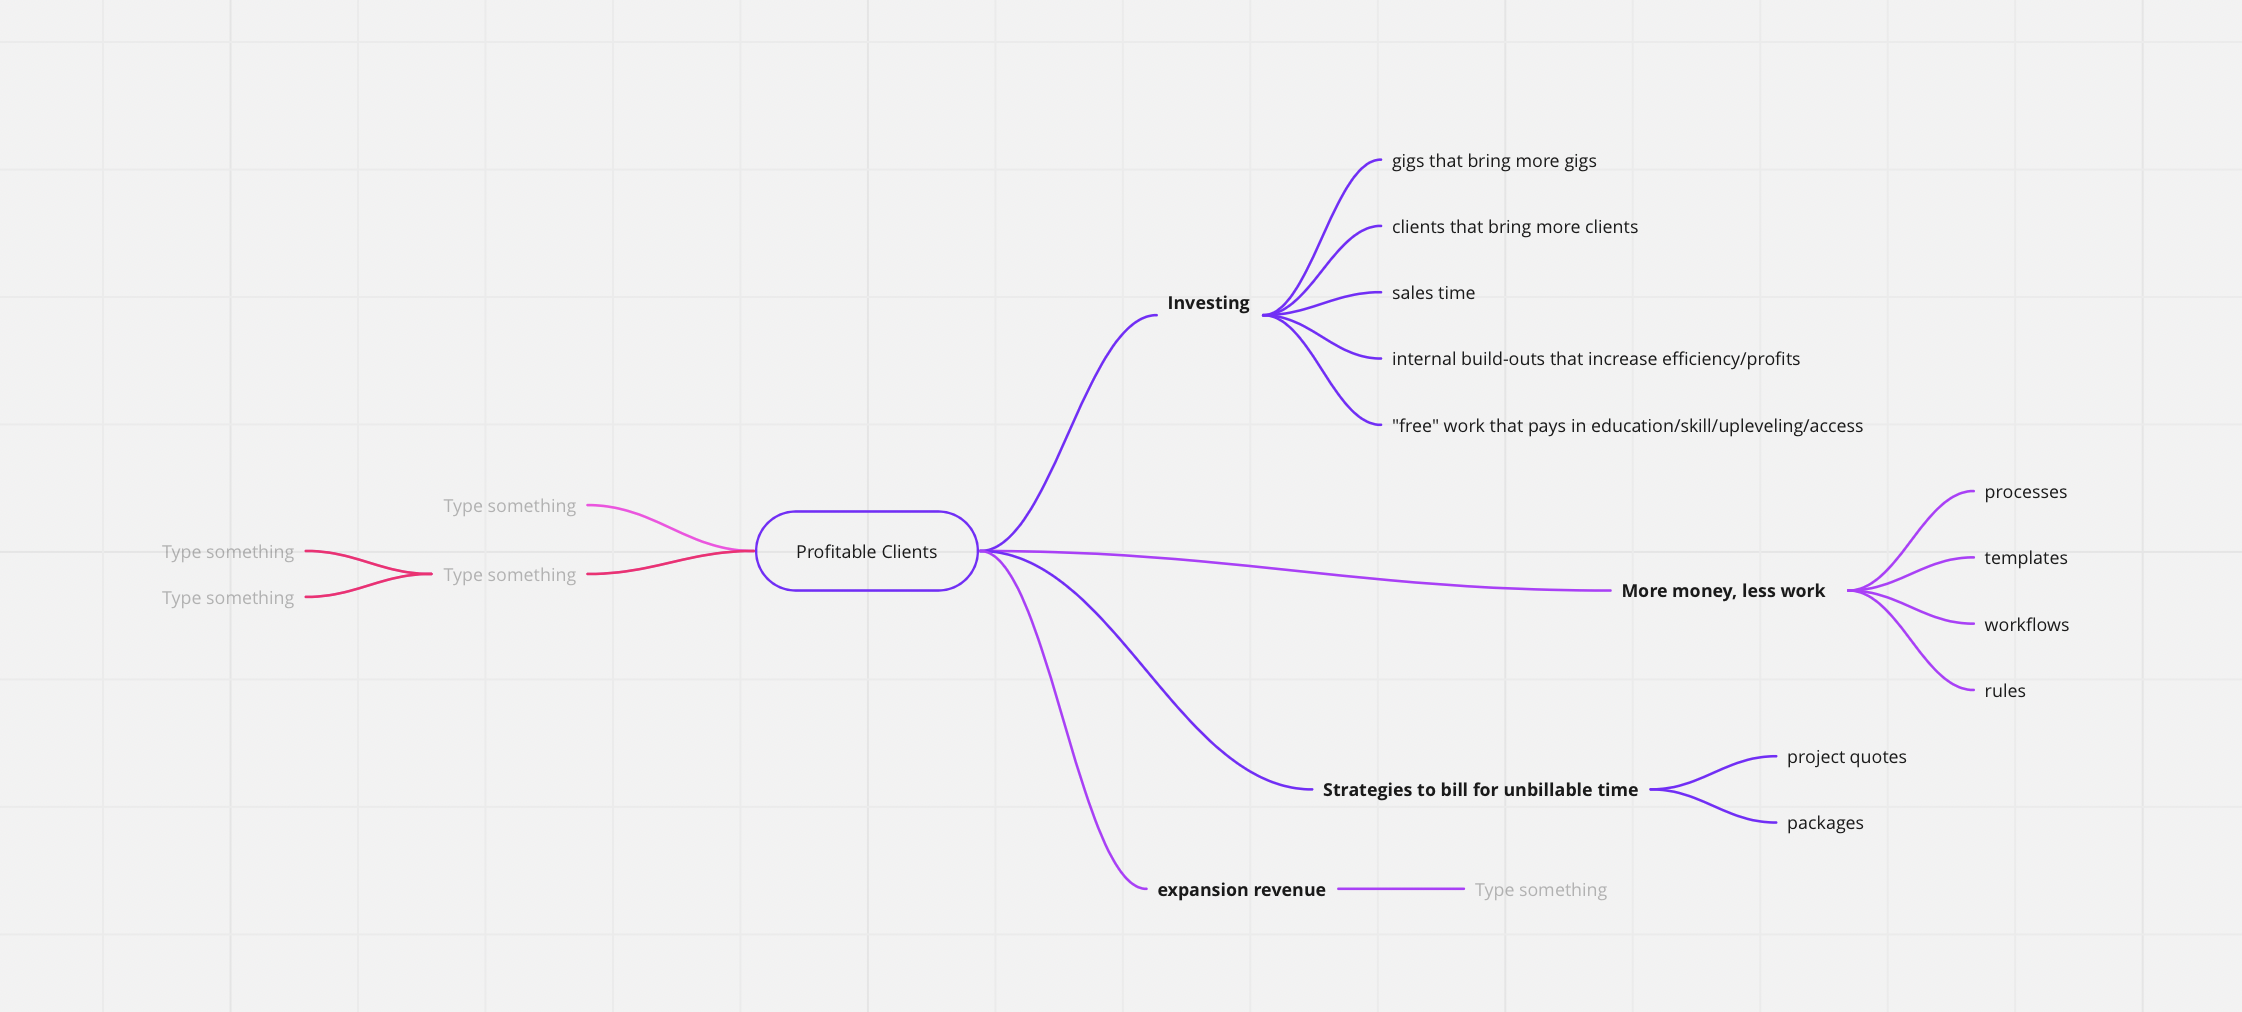 a mindmap titled Profitable Clients, with sections for "Investing," "more money, less work," "strategies to bill for un-billable time," and "expansion revenue"